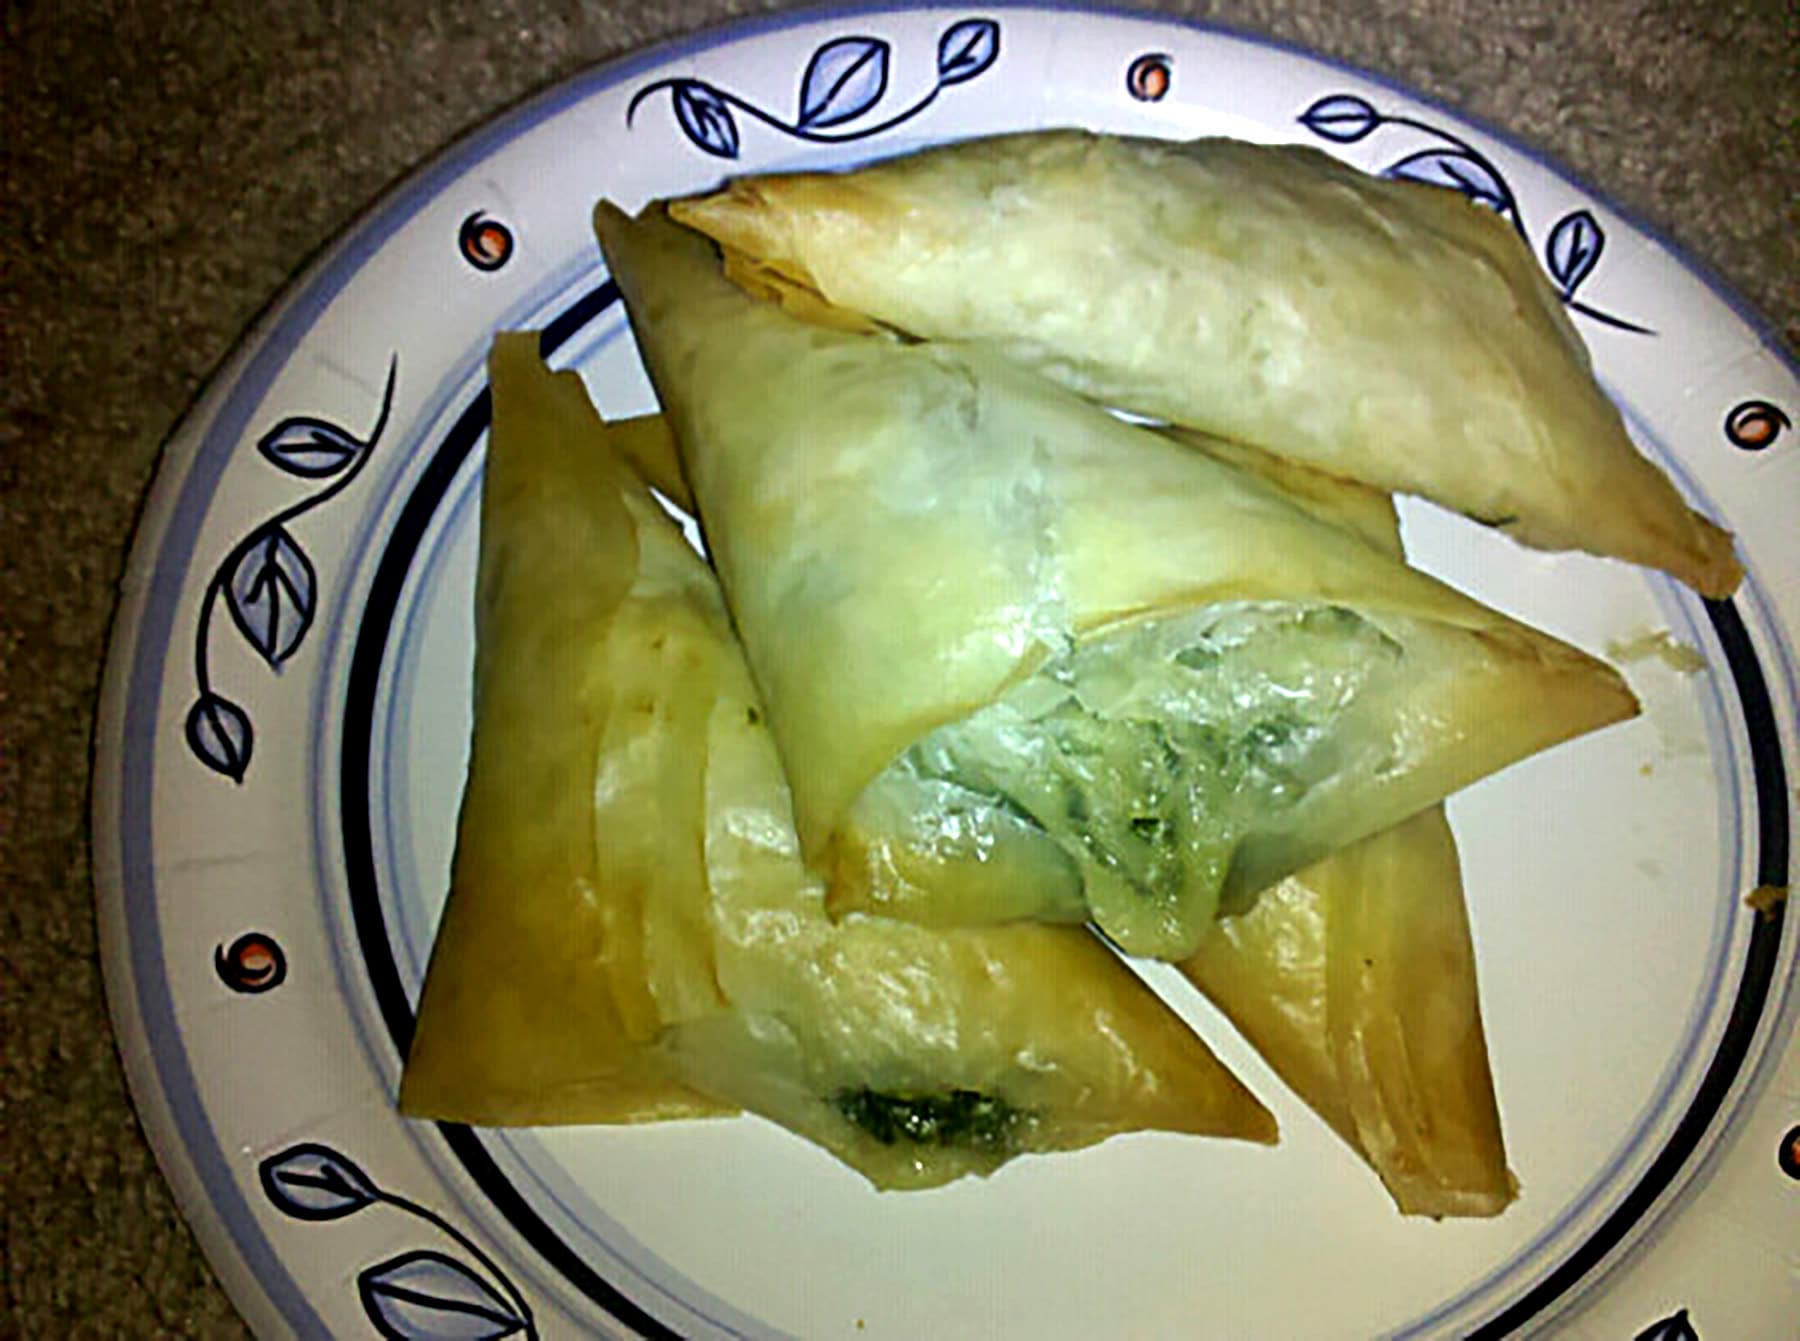 4 spanakopita pastries on a white paper plate with a blue floral border.